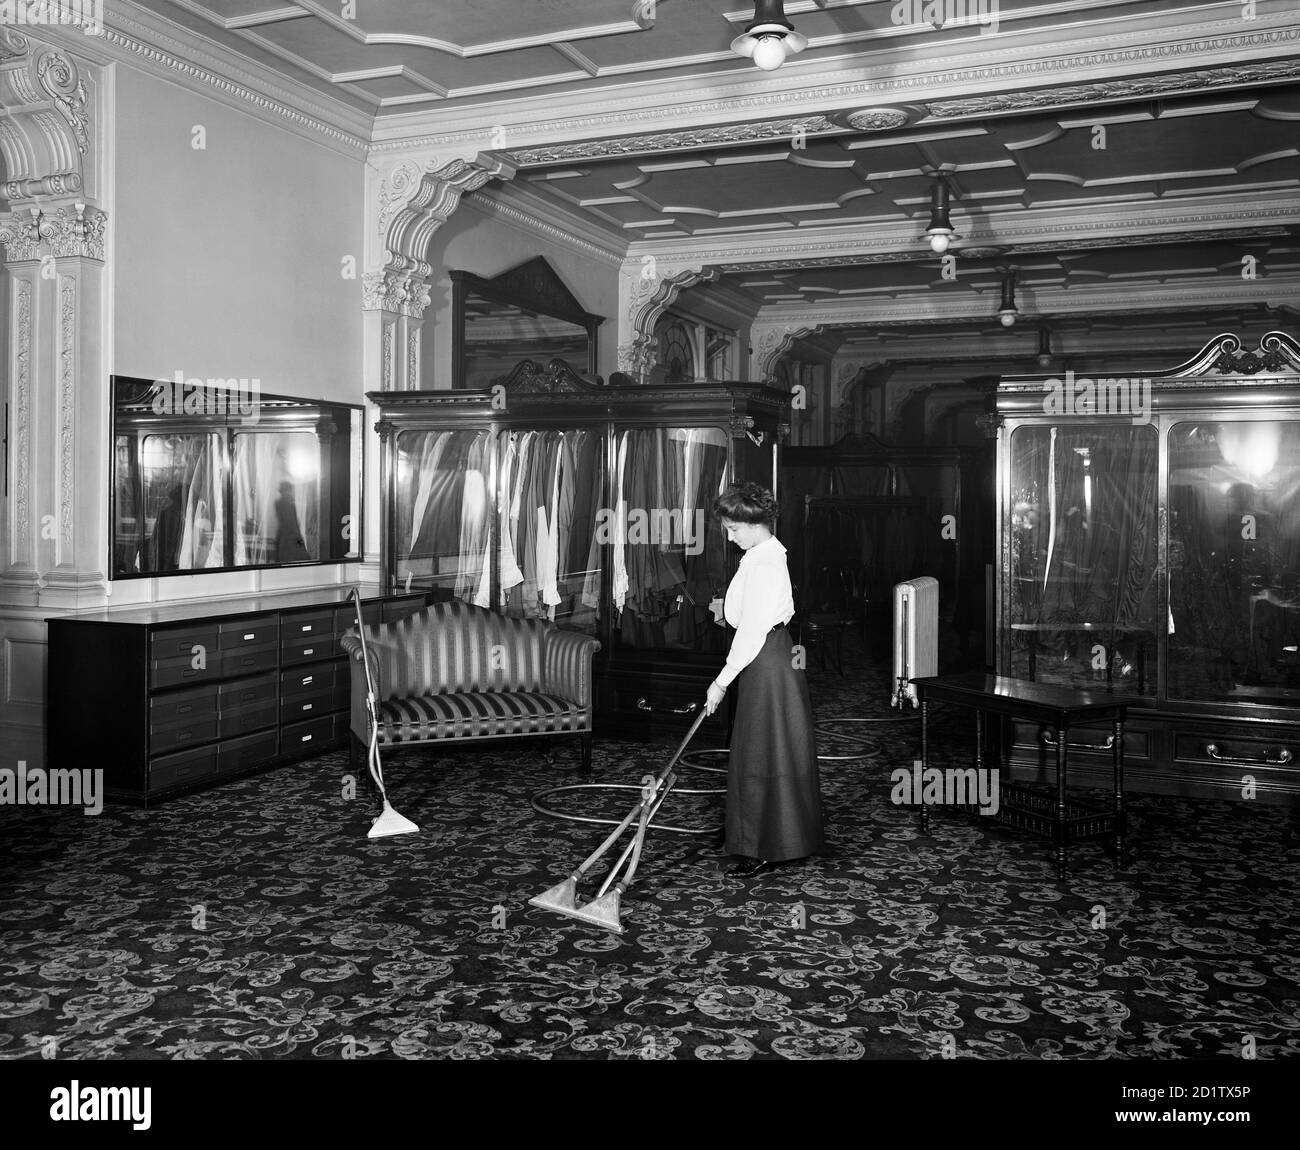 FREDERICK GORRINGE'S DEPARTMENT STORE, 75 Buckingham Palace Road, London. Interior view. A lady demonstrating the latest in vacuum cleaning technology. Gorringe's had opened in the 1900s, finally closing its doors in the 1960s.  Photographed by Bedford Lemere & Co in 1910. Stock Photo